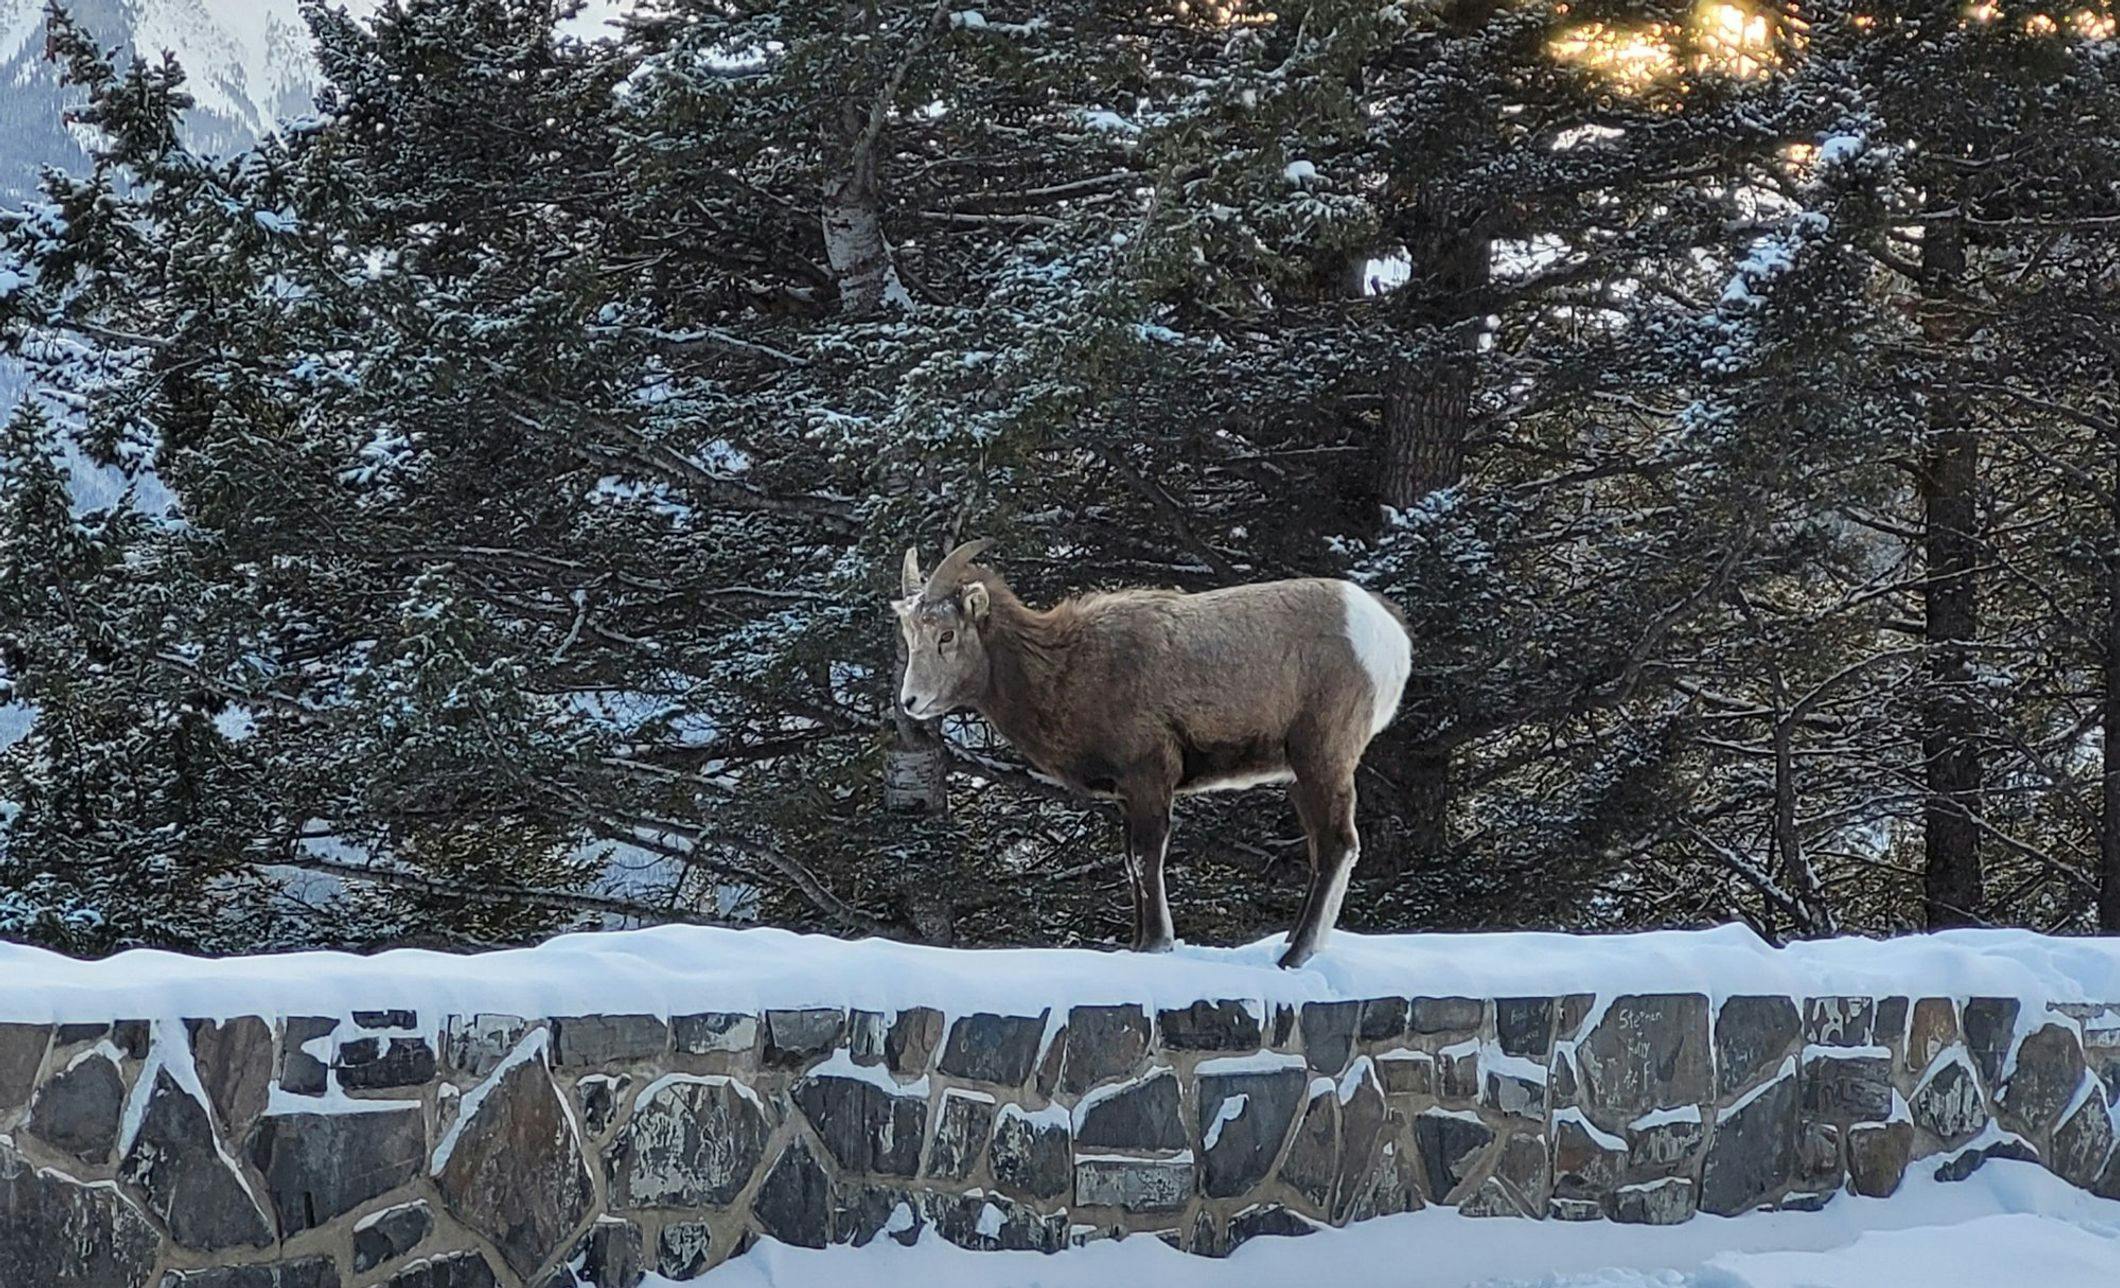 A big horn sheep standing on a ledge surrounded by snowy trees and deep snowfall